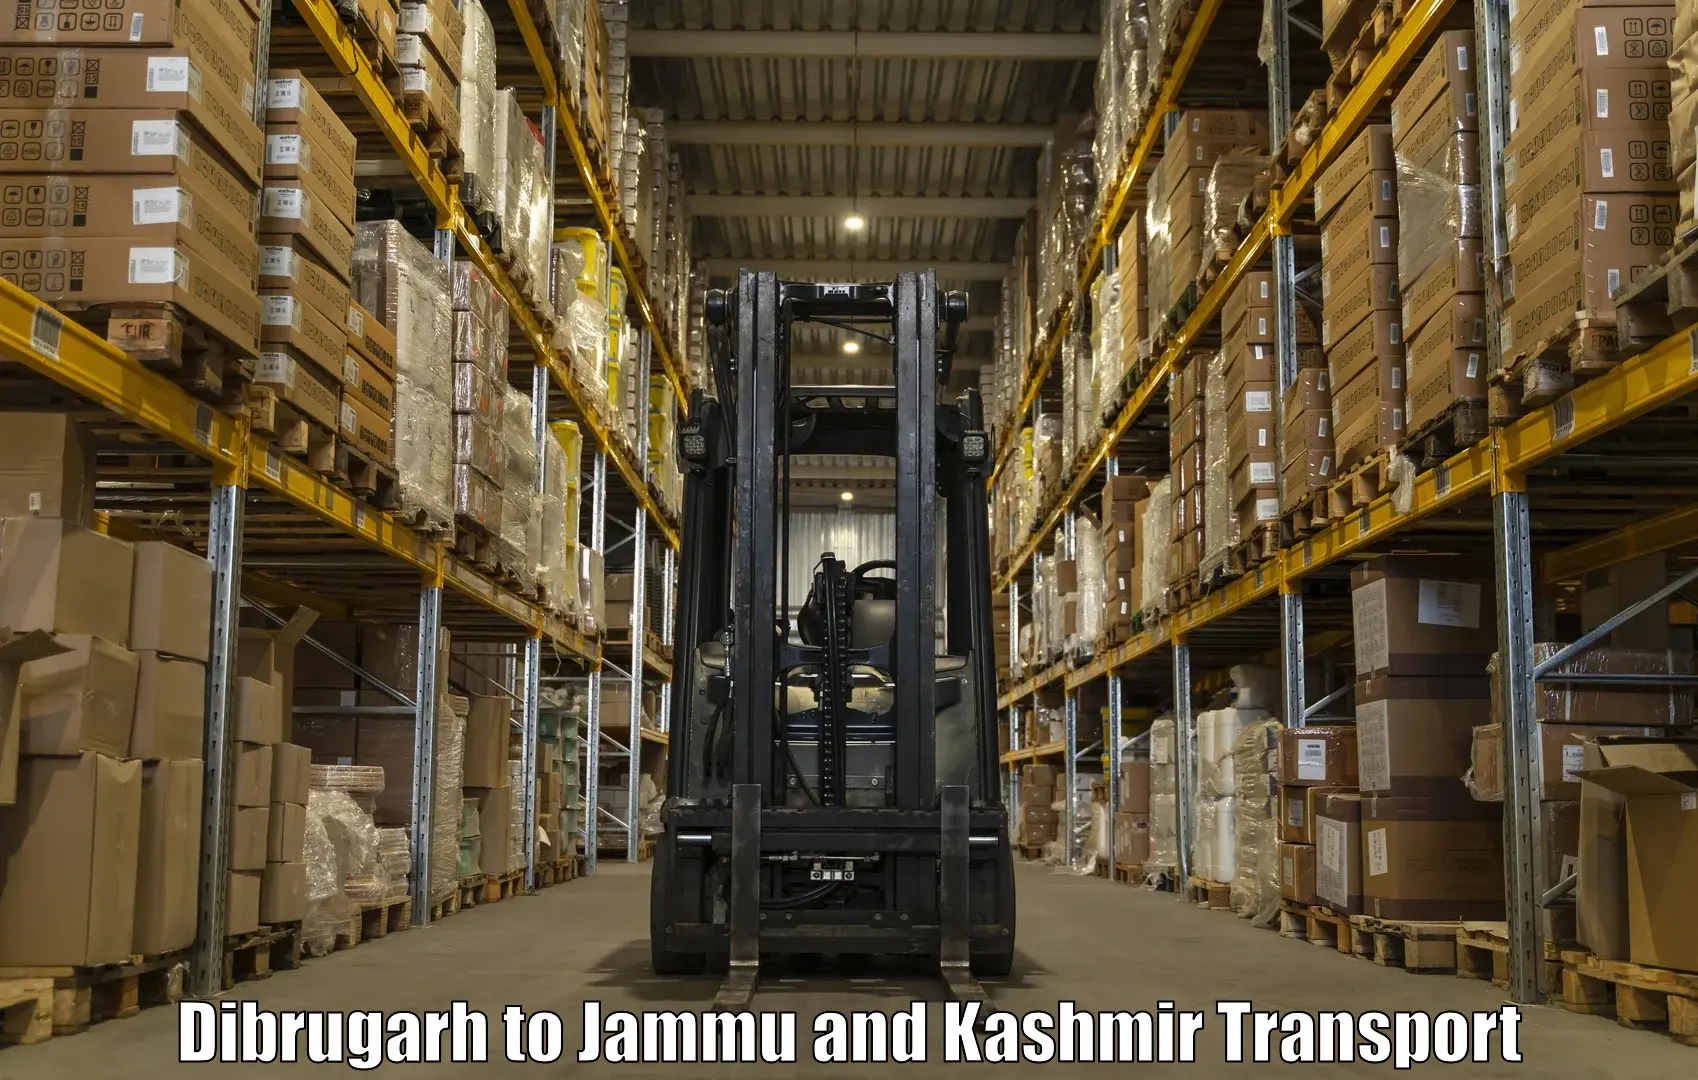 Daily parcel service transport in Dibrugarh to Kathua